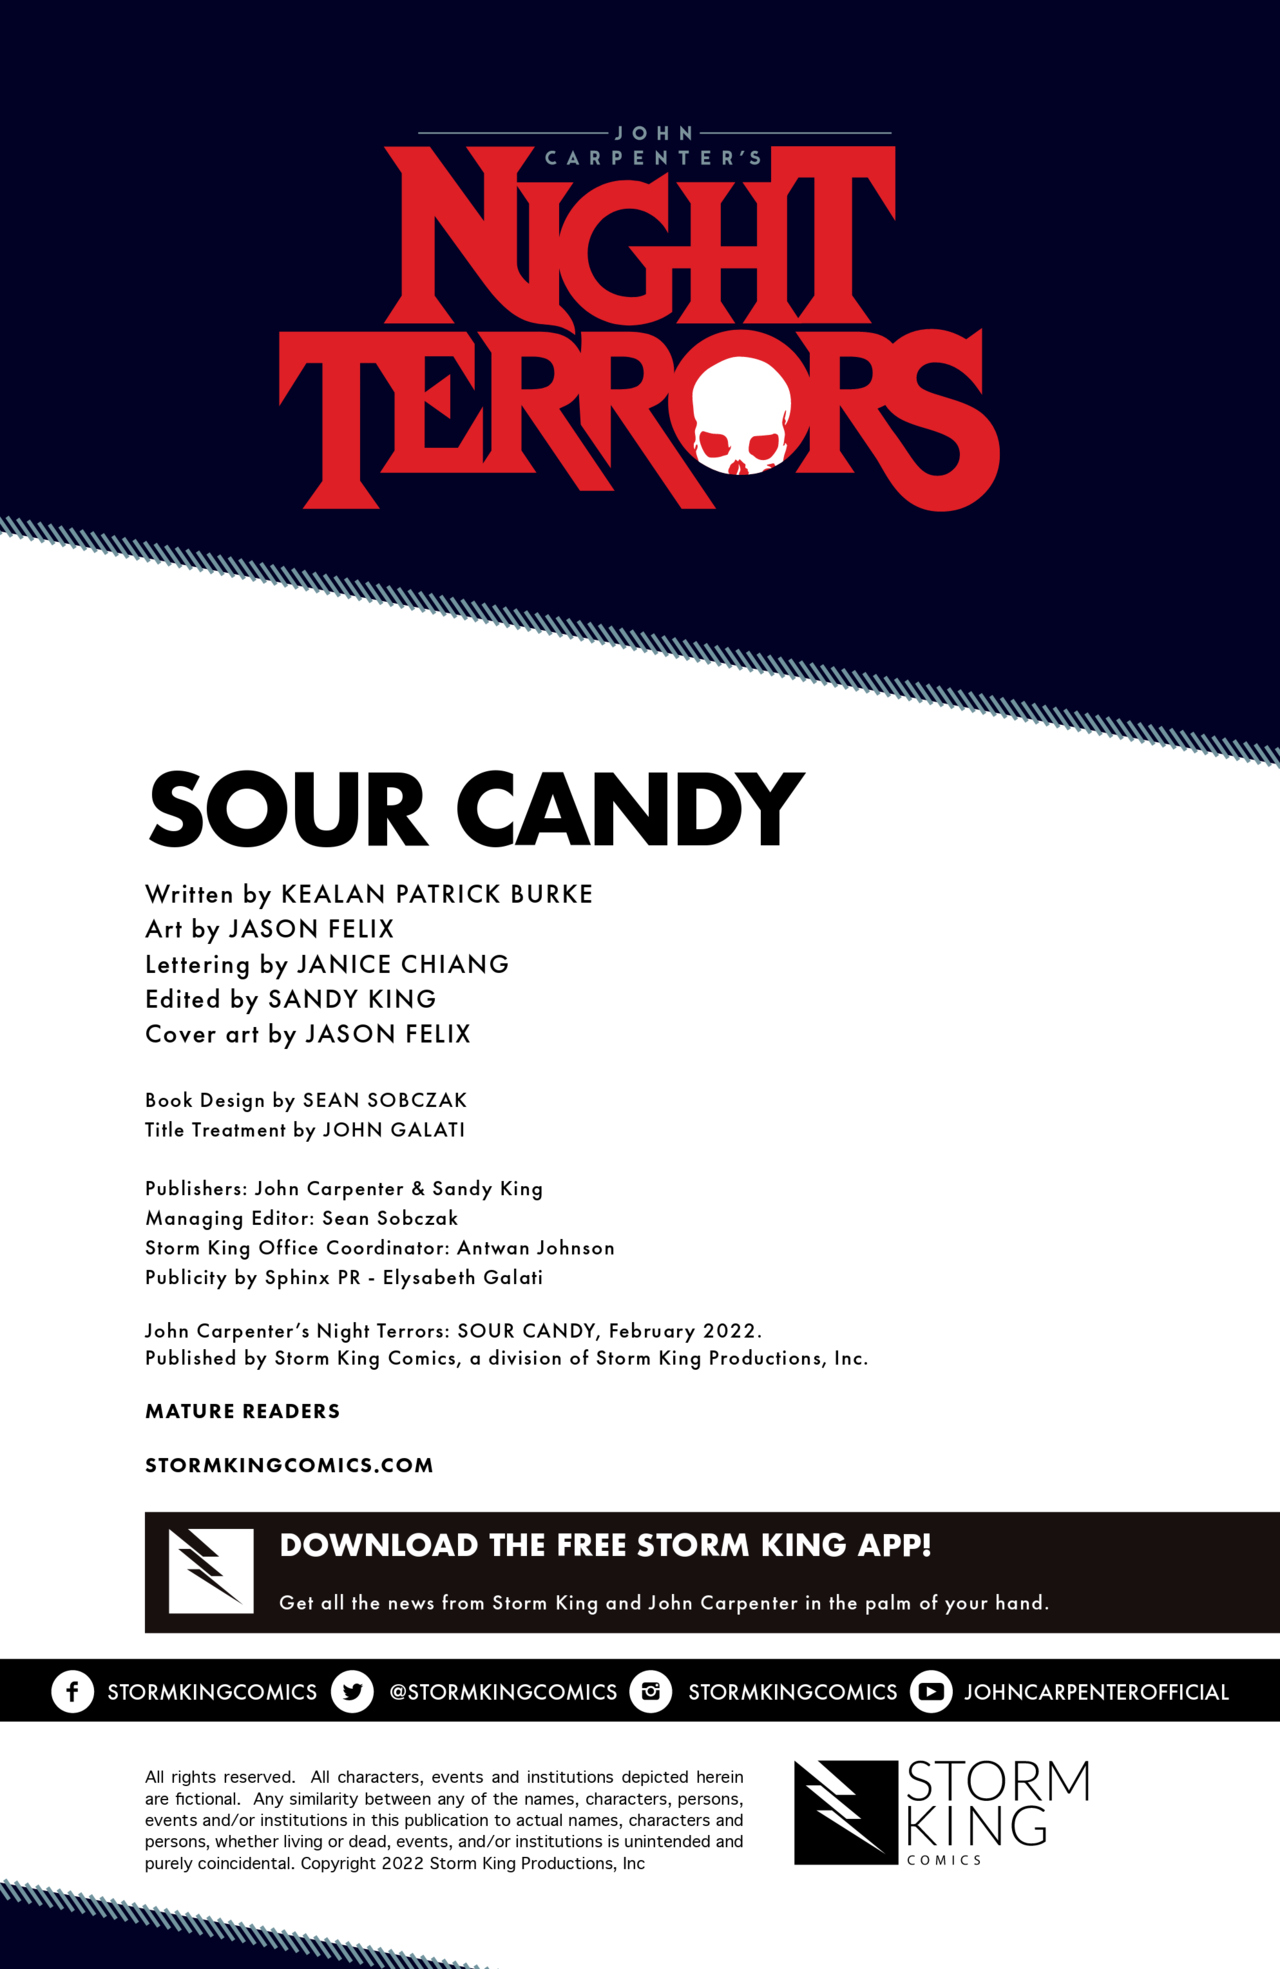 Read online John Carpenter's Night Terrors comic -  Issue # Sour Candy - 4